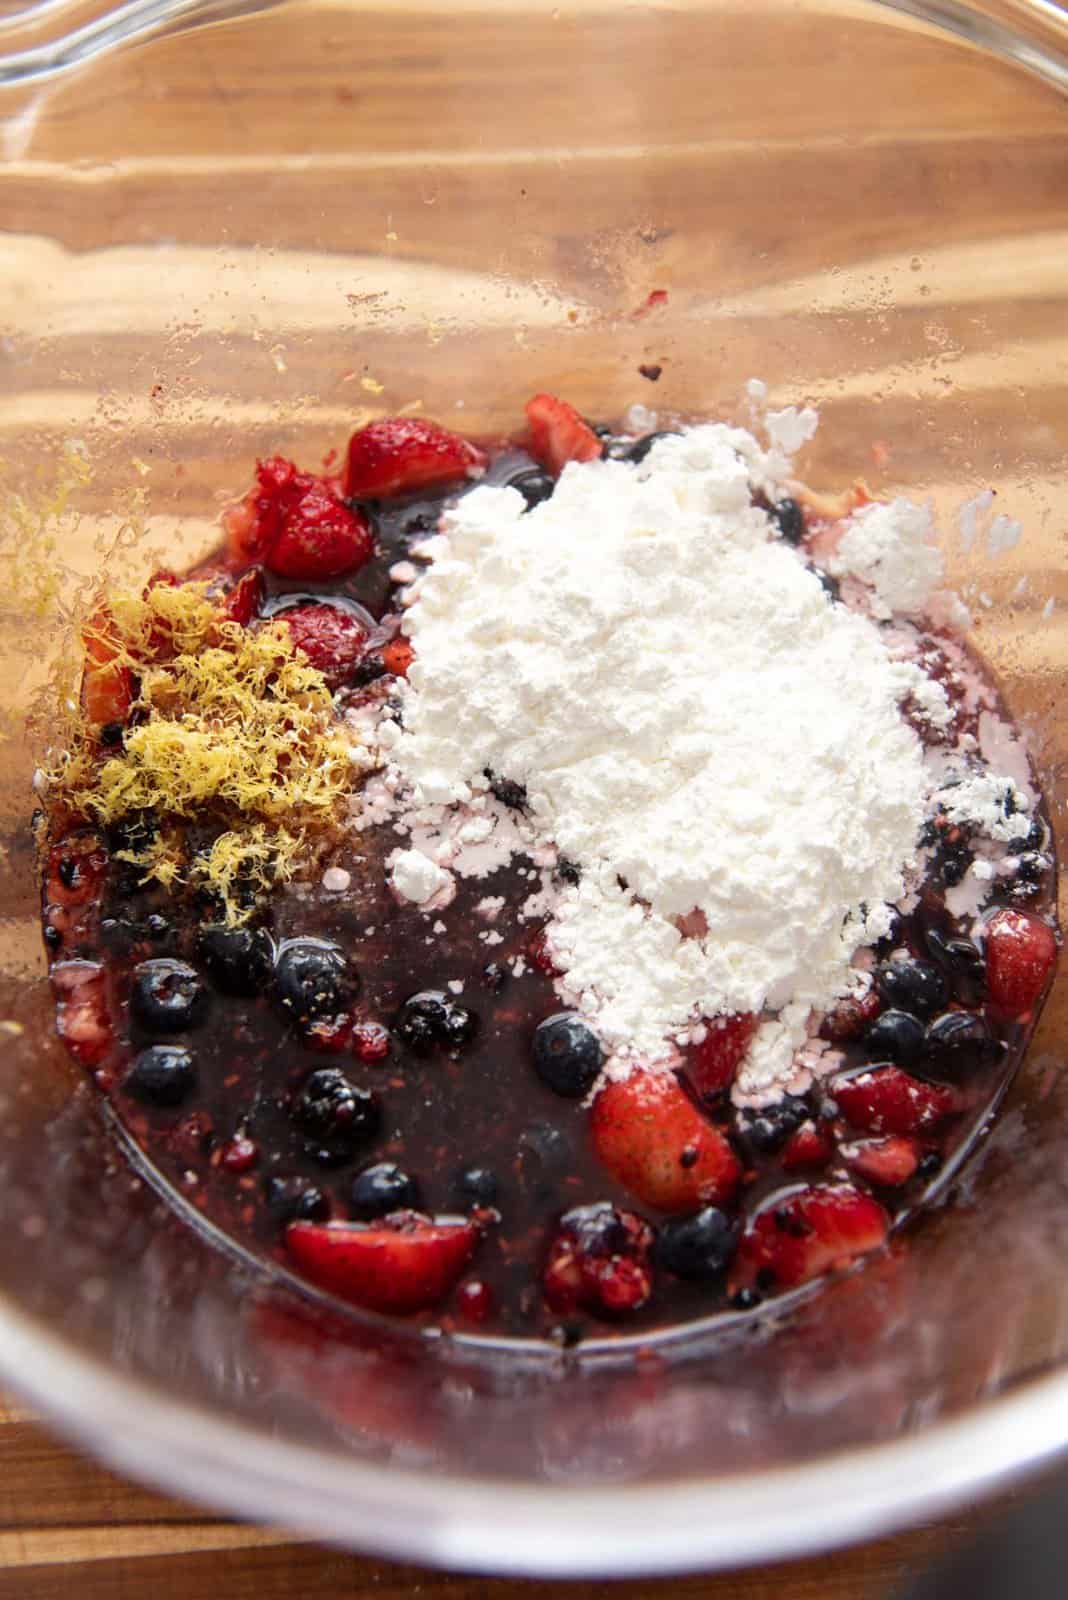 The crushed berries with lemon zest, juice and cornstarch placed on top before mixing.